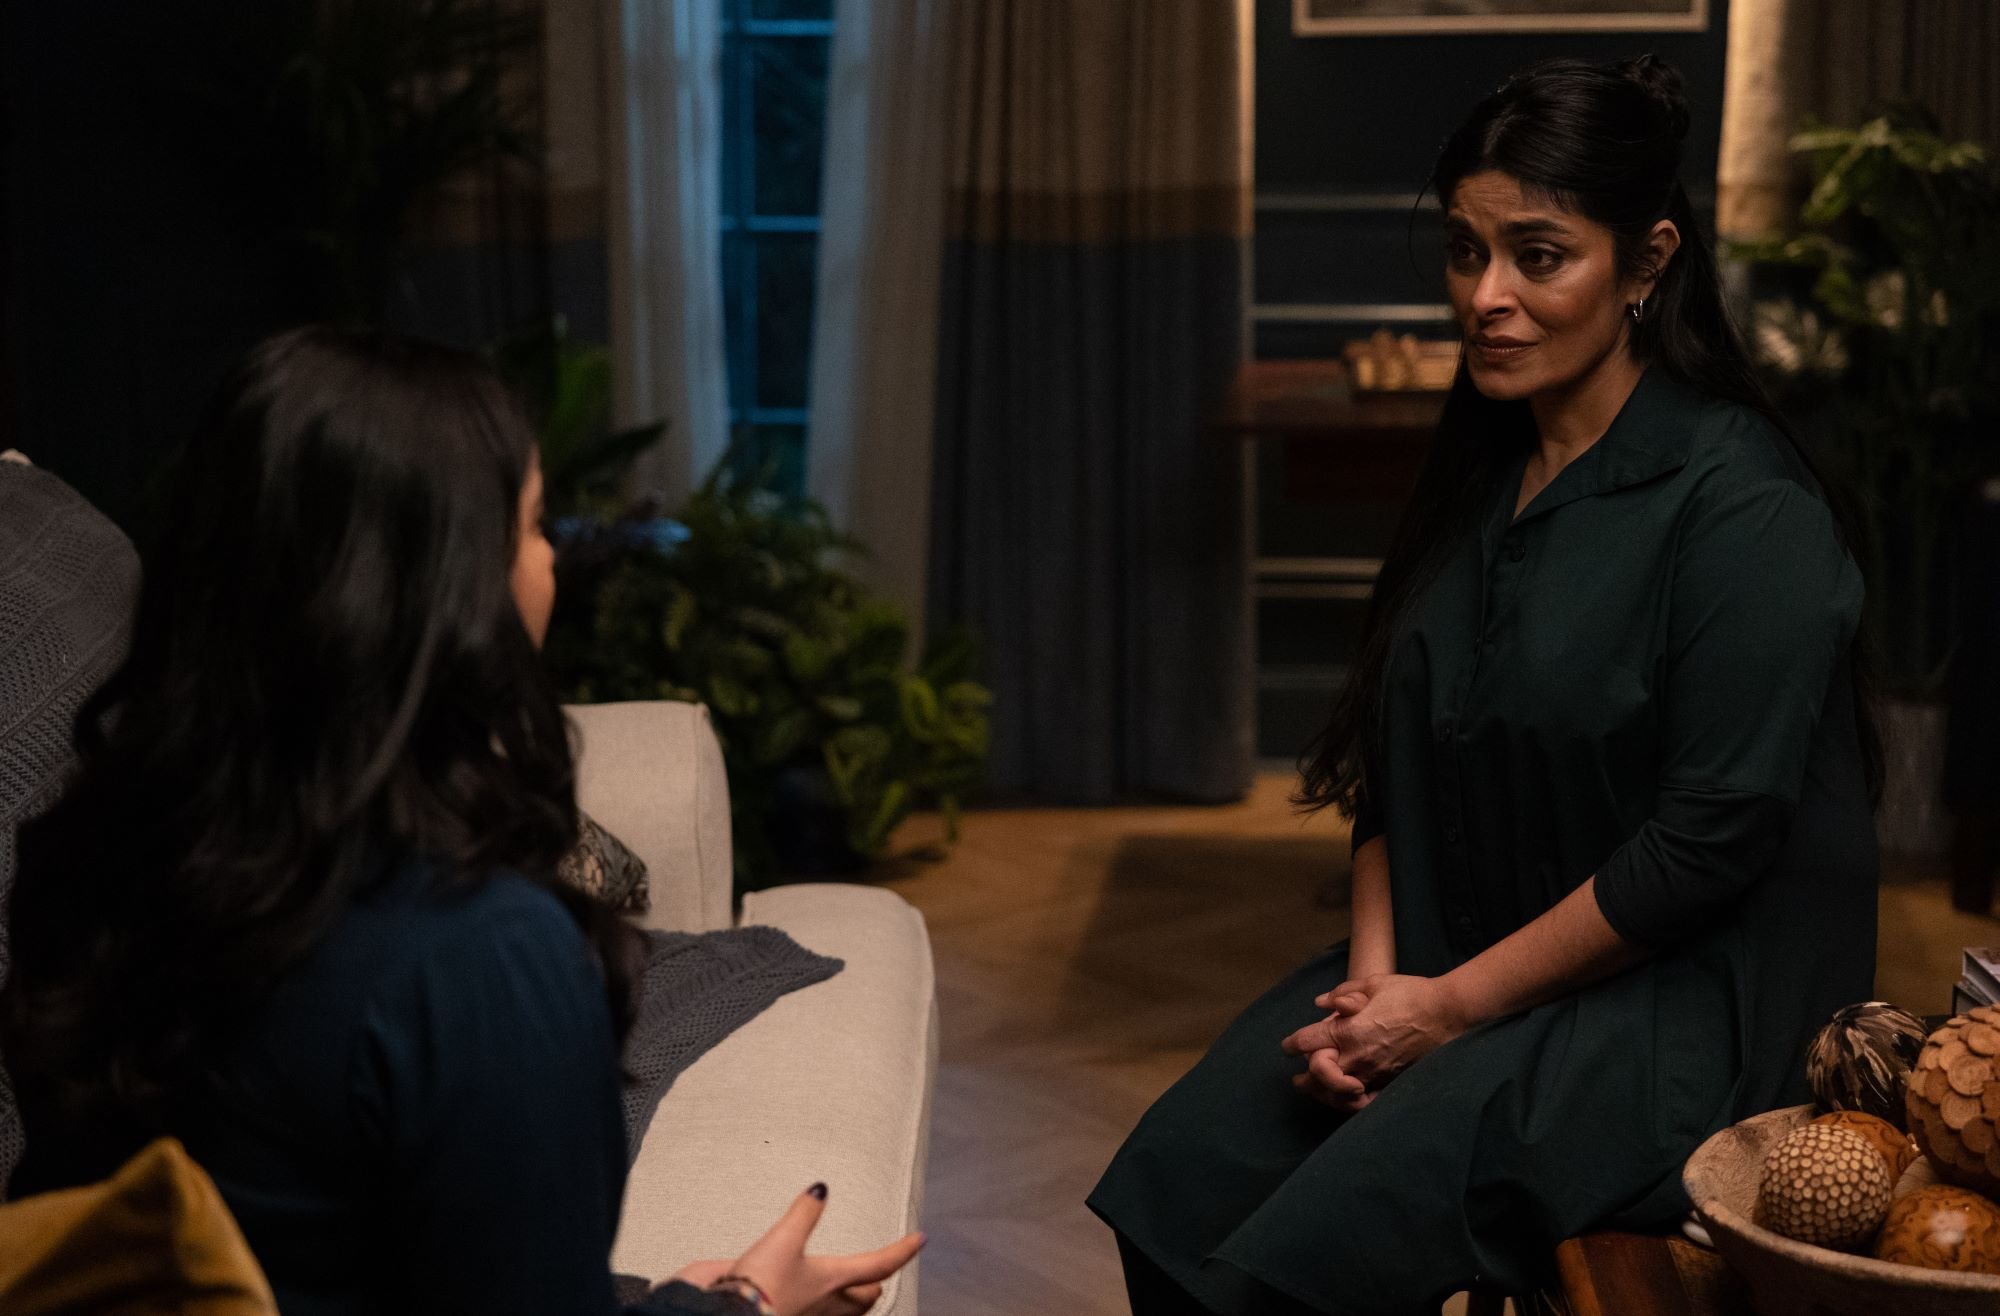 Iman Vellani and Nimra Bucha, in character as Kamala Khan and Najma in 'Ms. Marvel' Episode 3, which contains an MCU Easter egg, share a scene in a living room. Kamala wears a dark blue shirt. Najma wears a black jumpsuit.